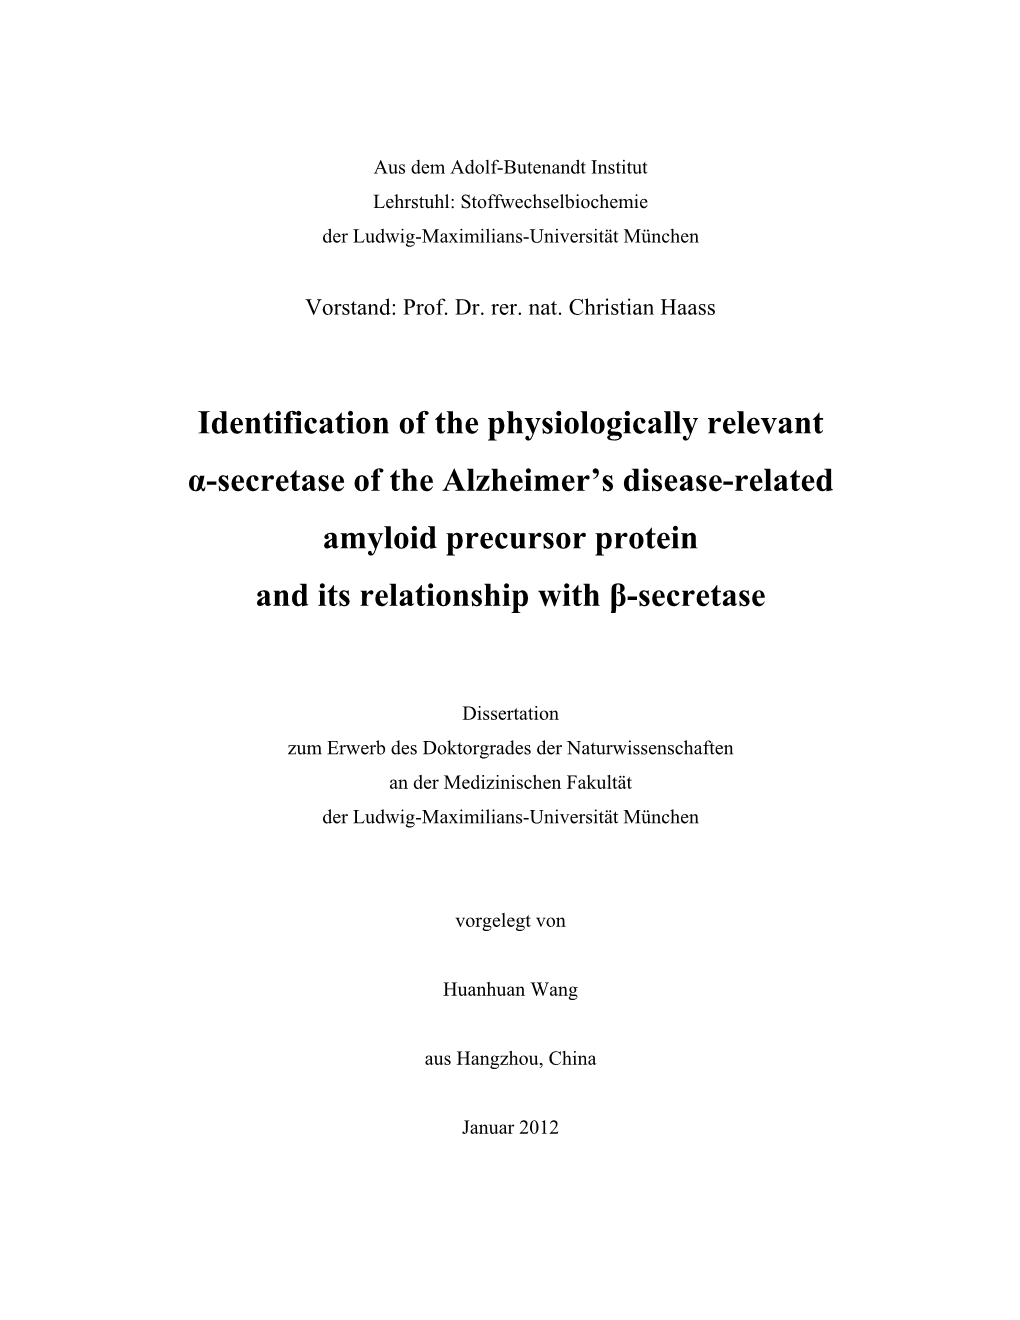 Identification of the Physiologically Relevant Α-Secretase of the Alzheimer’S Disease-Related Amyloid Precursor Protein and Its Relationship with Β-Secretase